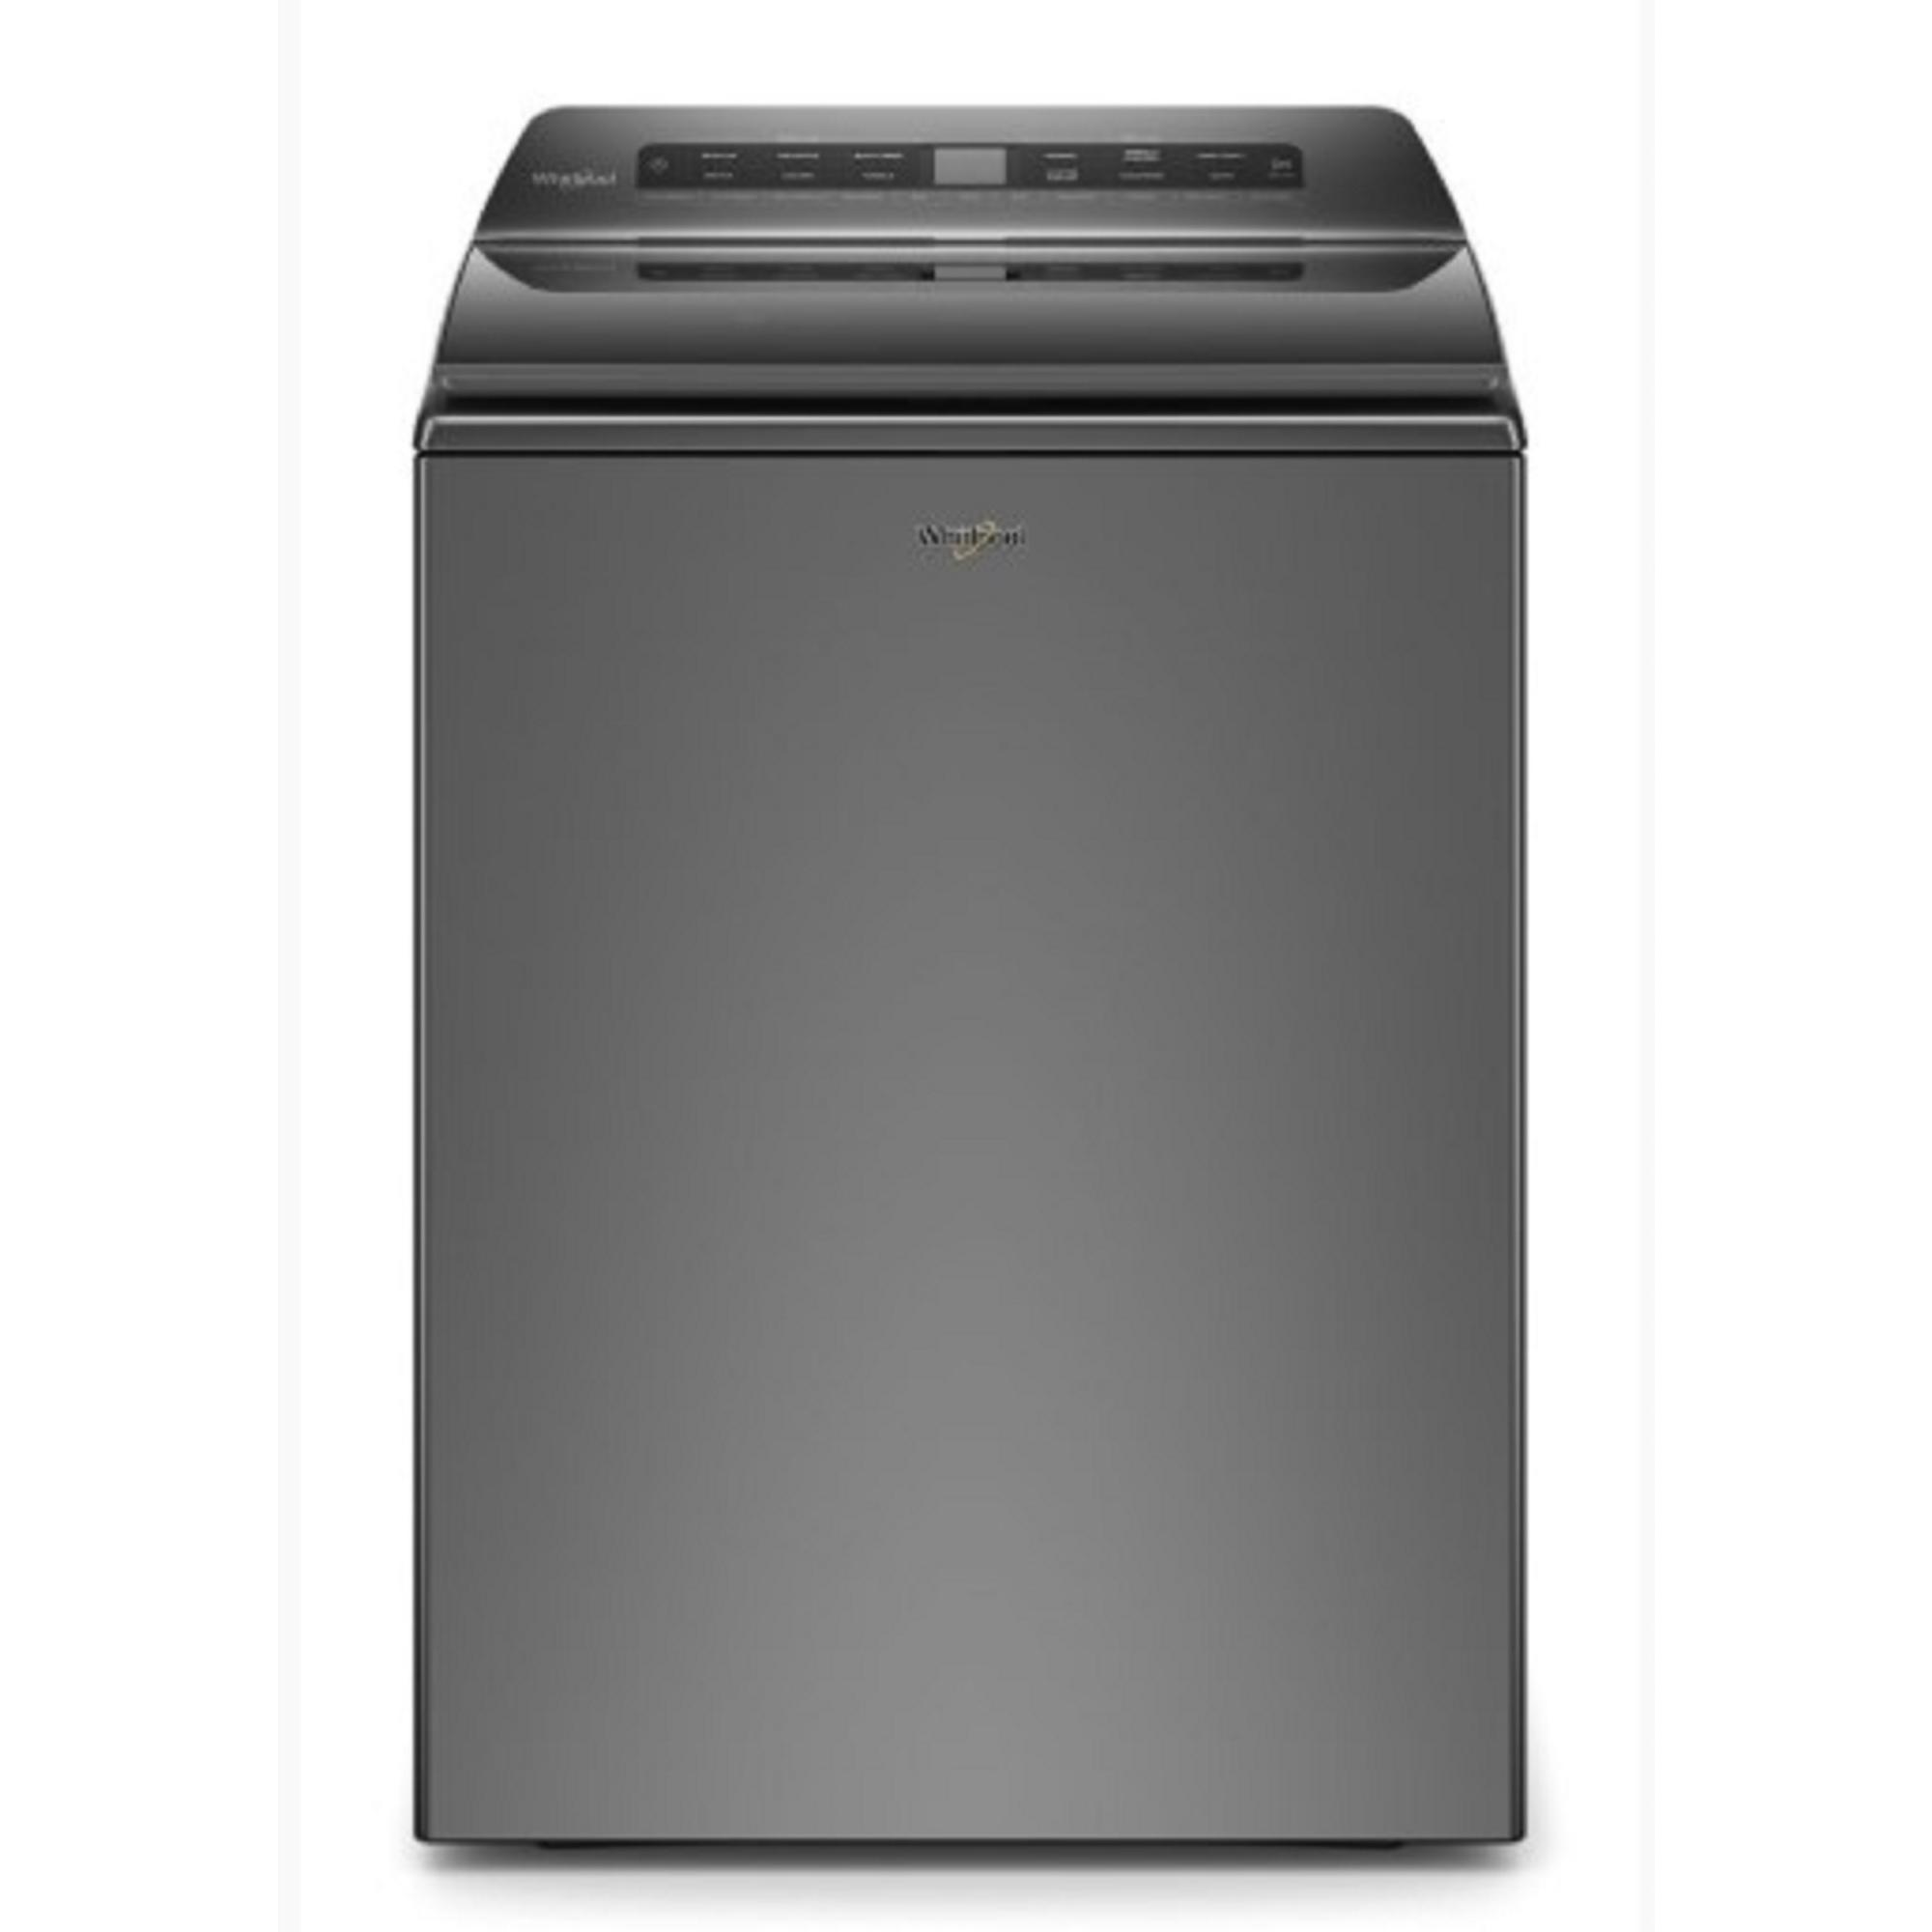 Whirlpool WTW5105HC 4.7 Cu. Ft. Top Load Washer with Pretreat Station in Chrome Shadow